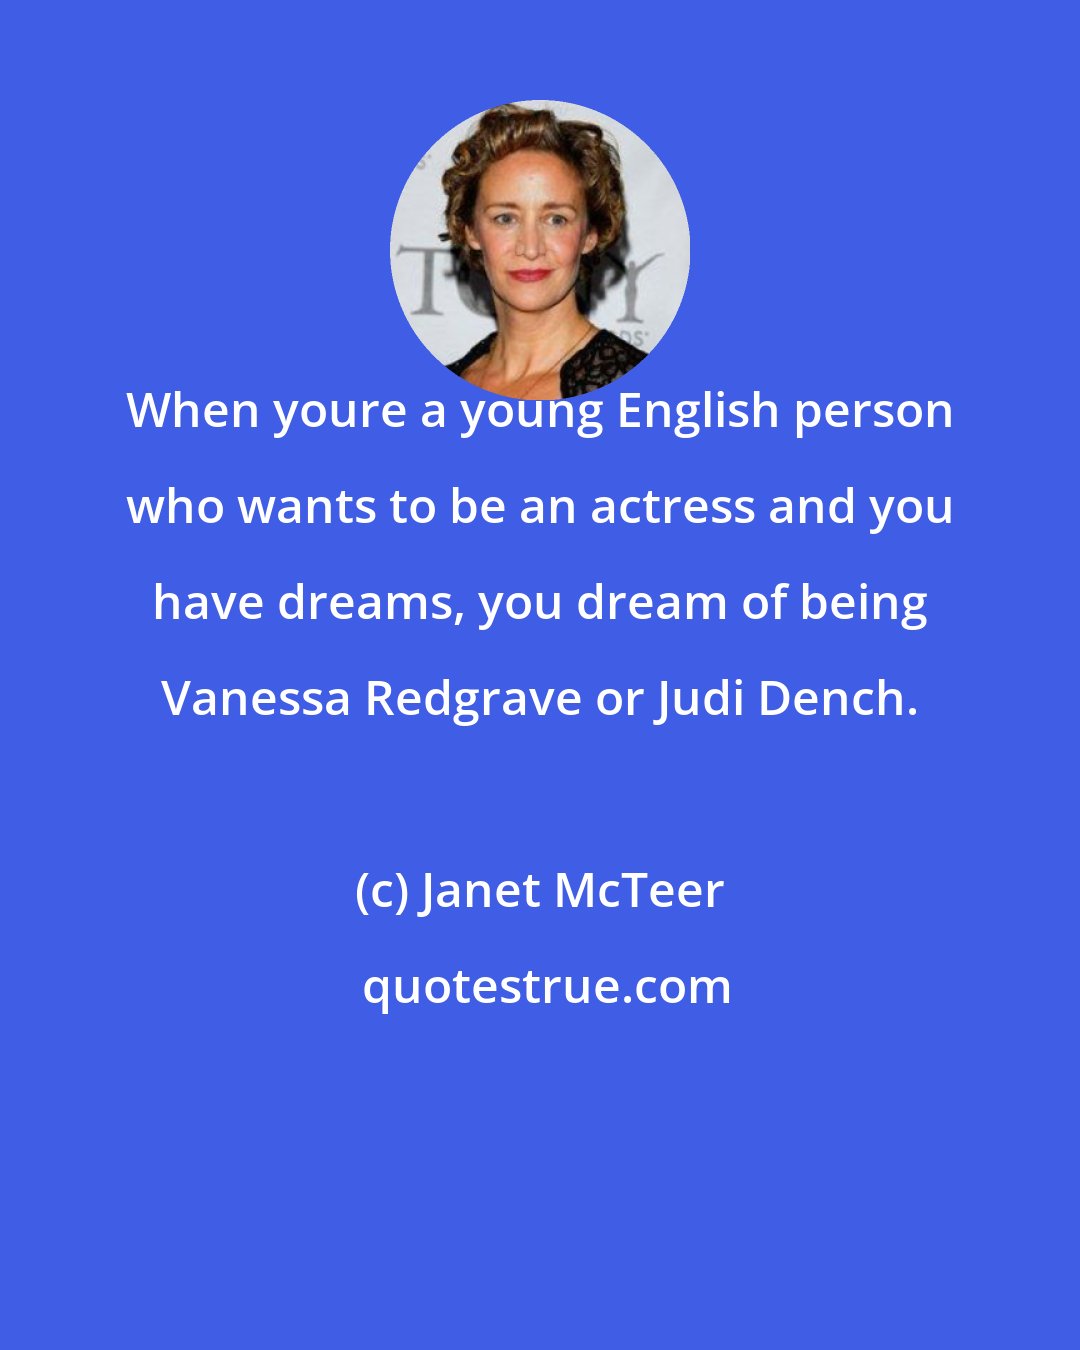 Janet McTeer: When youre a young English person who wants to be an actress and you have dreams, you dream of being Vanessa Redgrave or Judi Dench.